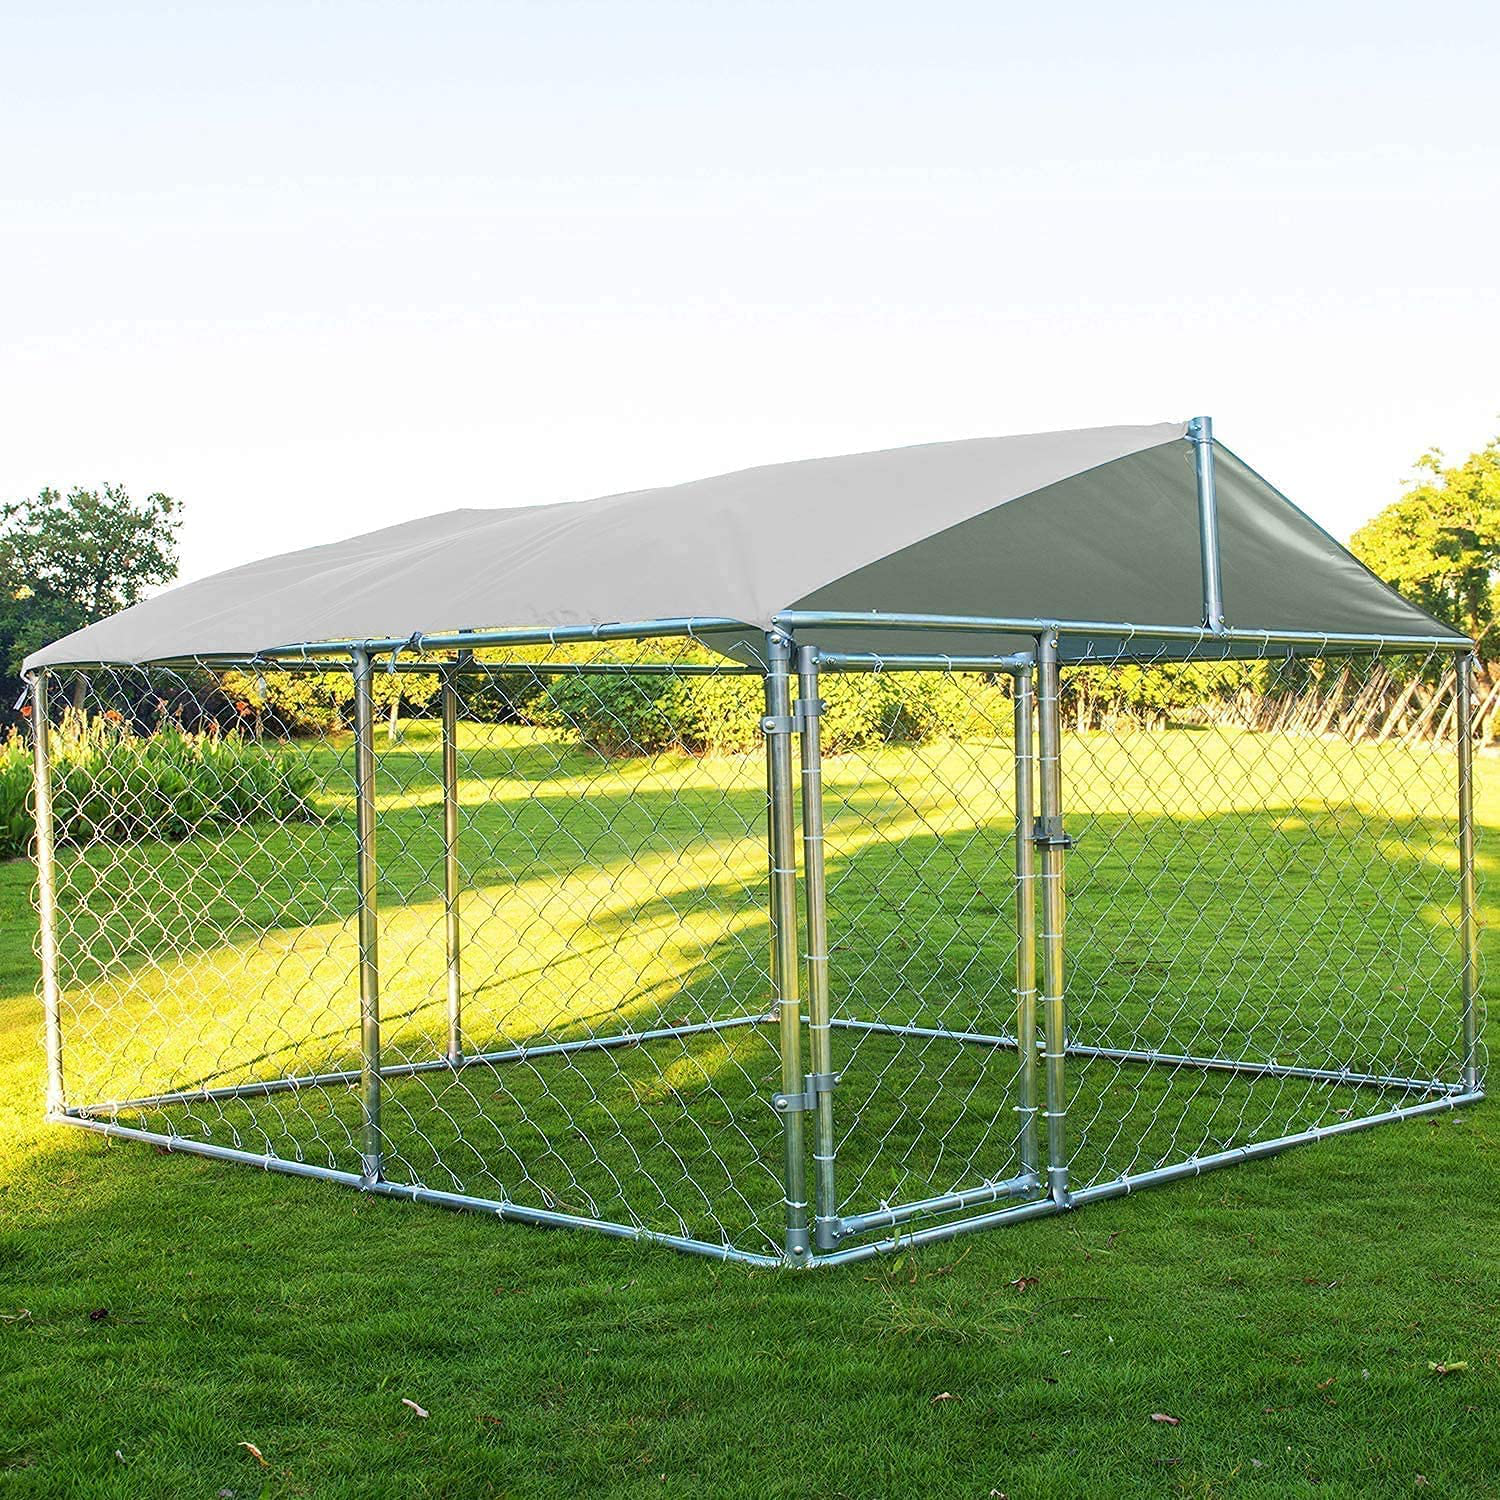 LEISU Outdoor Dog Kennel Heavy Duty Dog House with Water Resistant Cover Dog Cage Pet Resort Kennel Steel Fence with Secure Lock Mesh Sidewalls